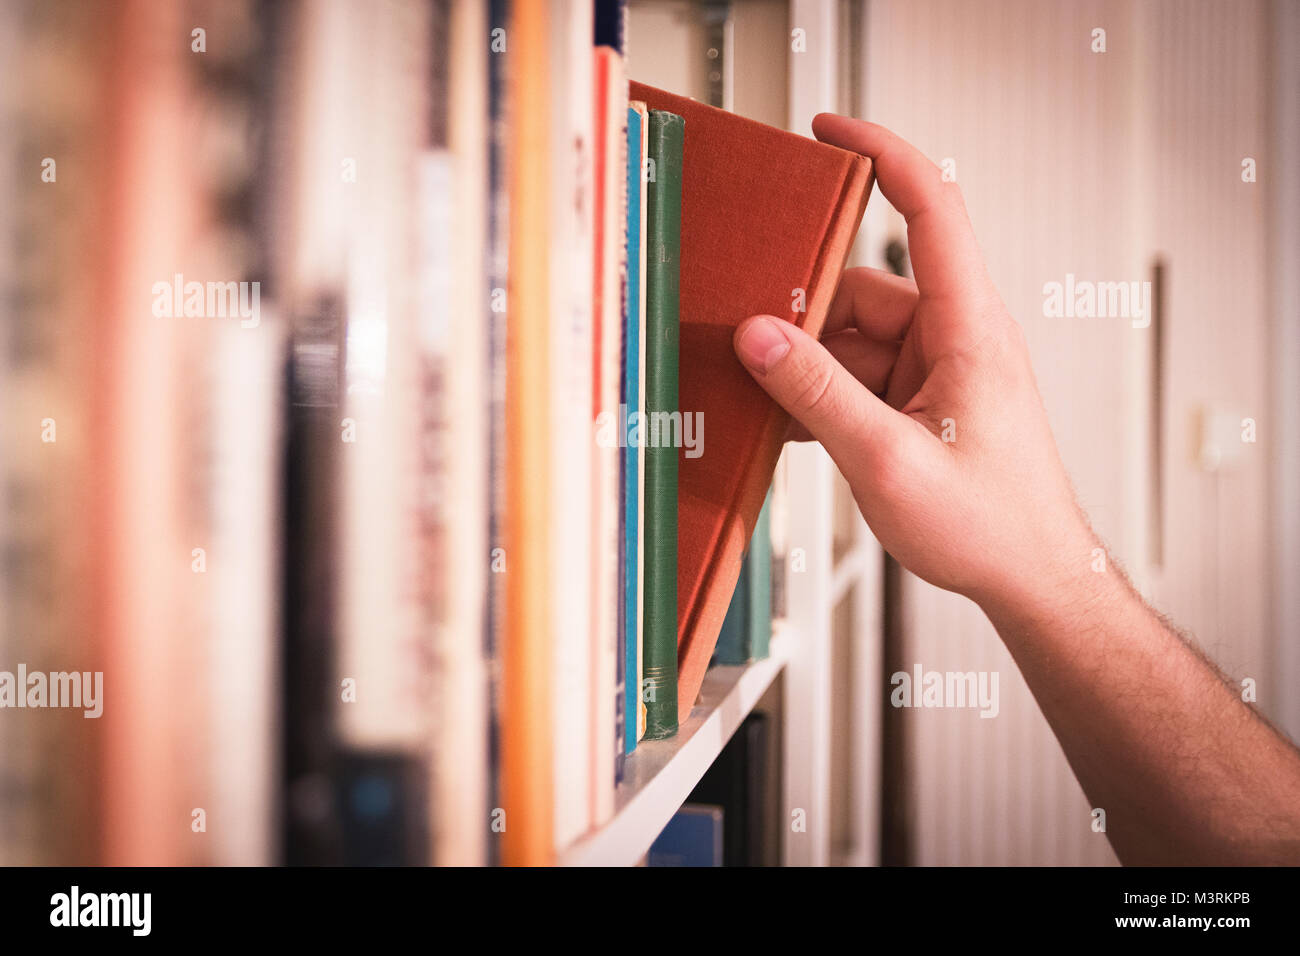 Hand reaching for classic book in library. Stock Photo